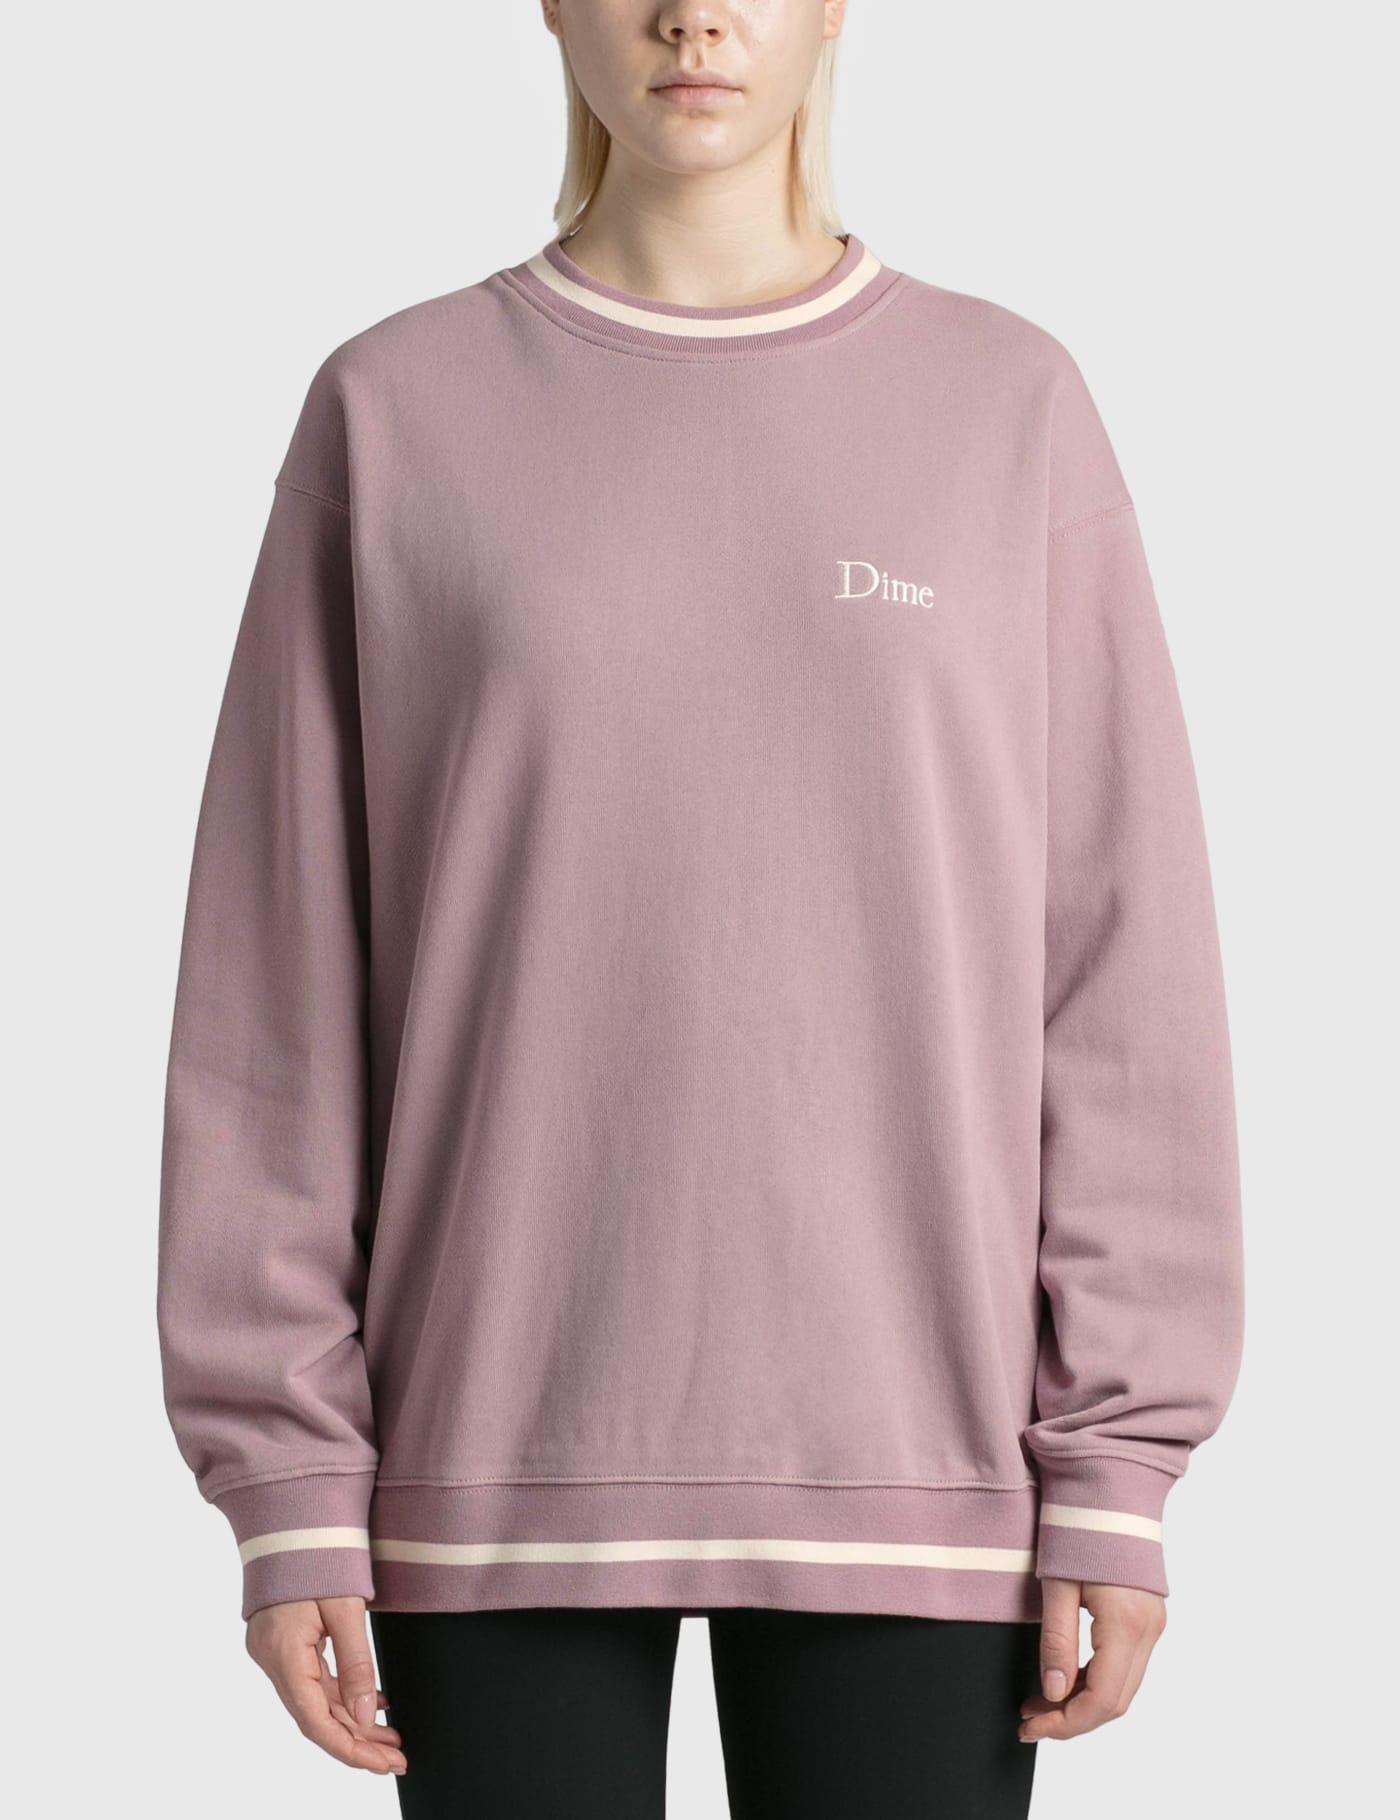 Dime - Classic French Terry Crewneck | HBX - Globally Curated 